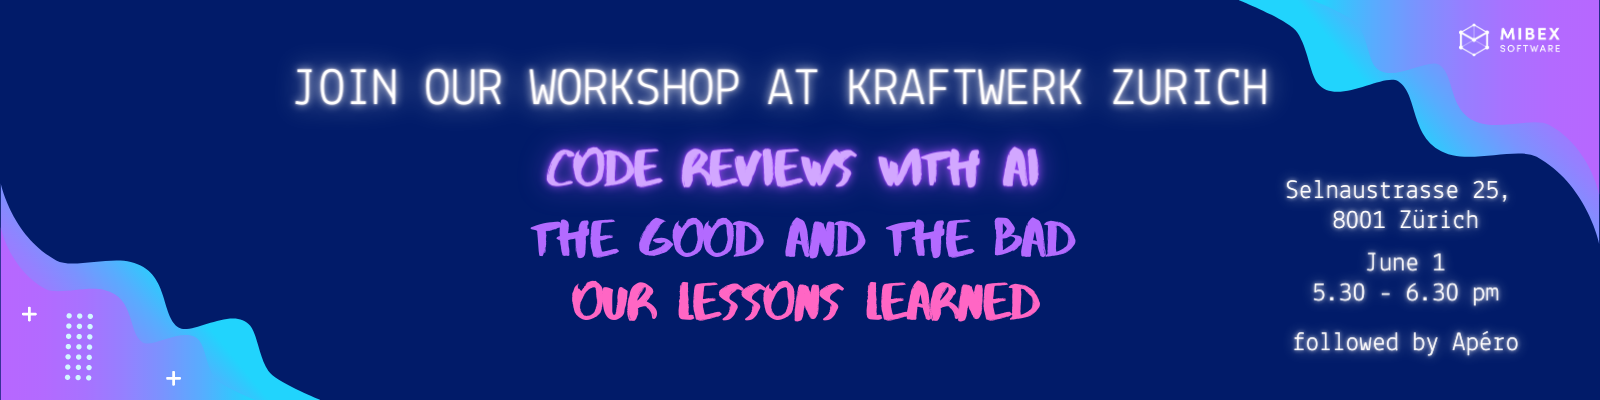 code-reviews-with-ai-workshop-banner